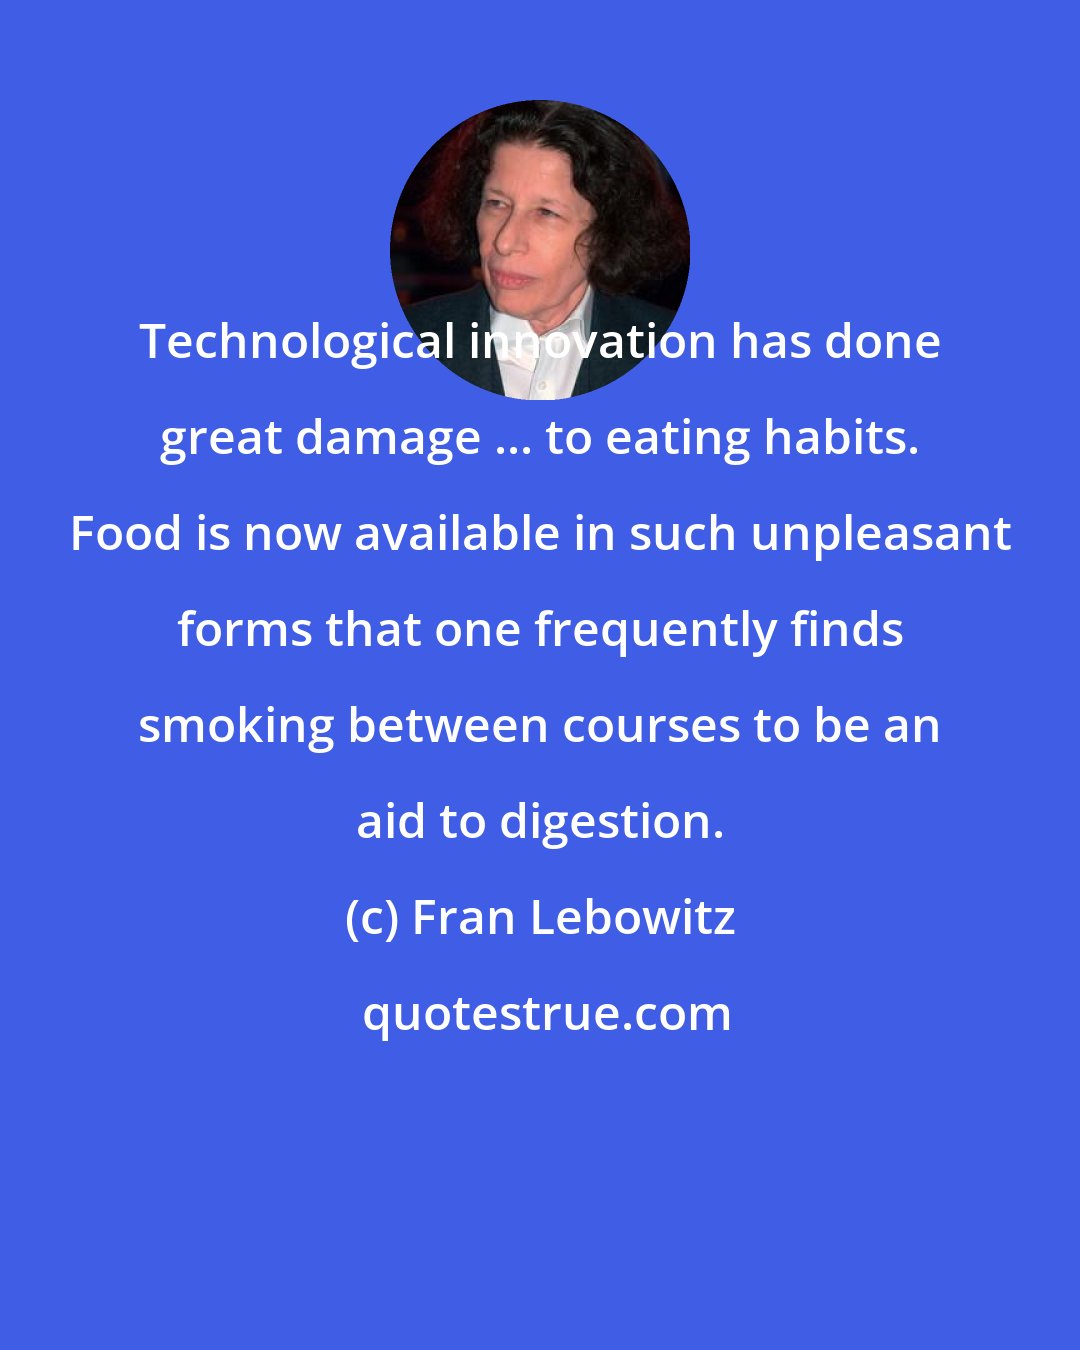 Fran Lebowitz: Technological innovation has done great damage ... to eating habits. Food is now available in such unpleasant forms that one frequently finds smoking between courses to be an aid to digestion.